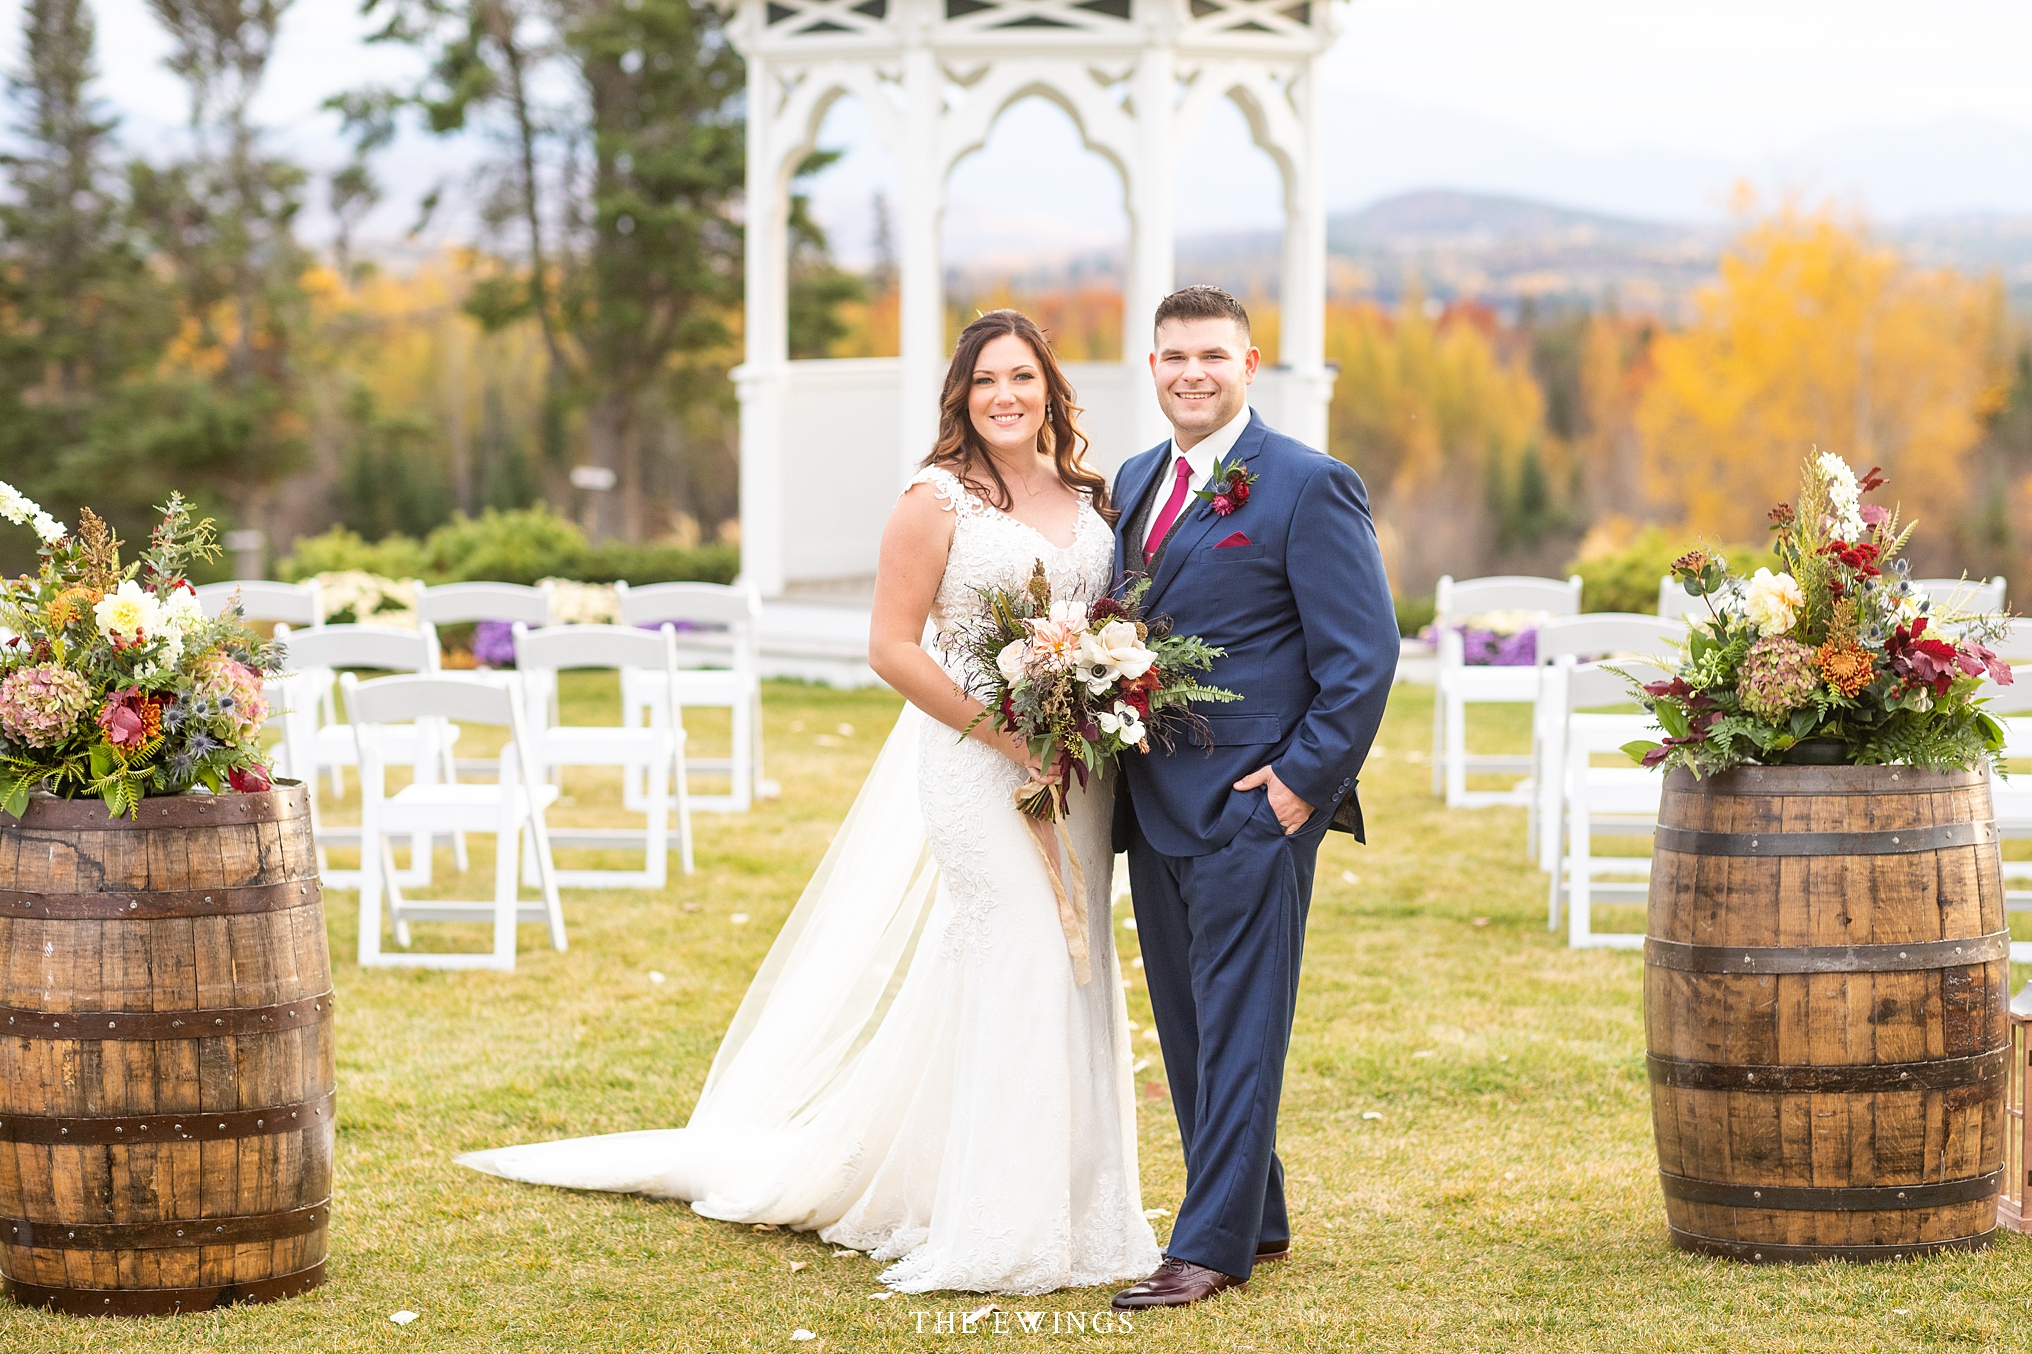 These two eloped at the Mountainview Grand in the white mountains of New Hampshire, with views of Mount Washington.